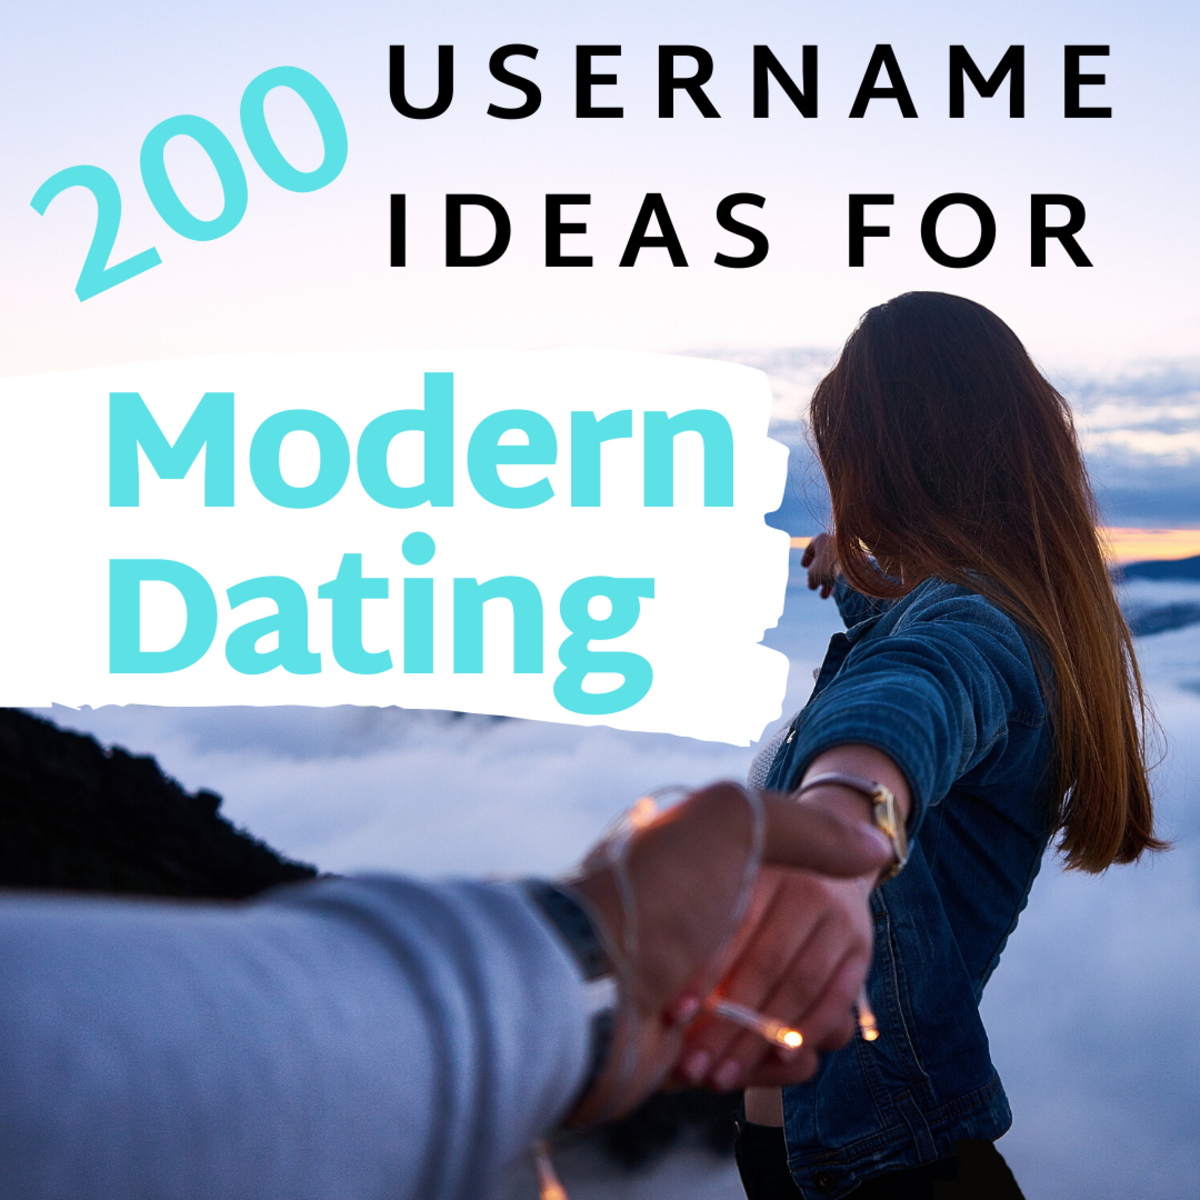 Clever Usernames For Dating Made Easy